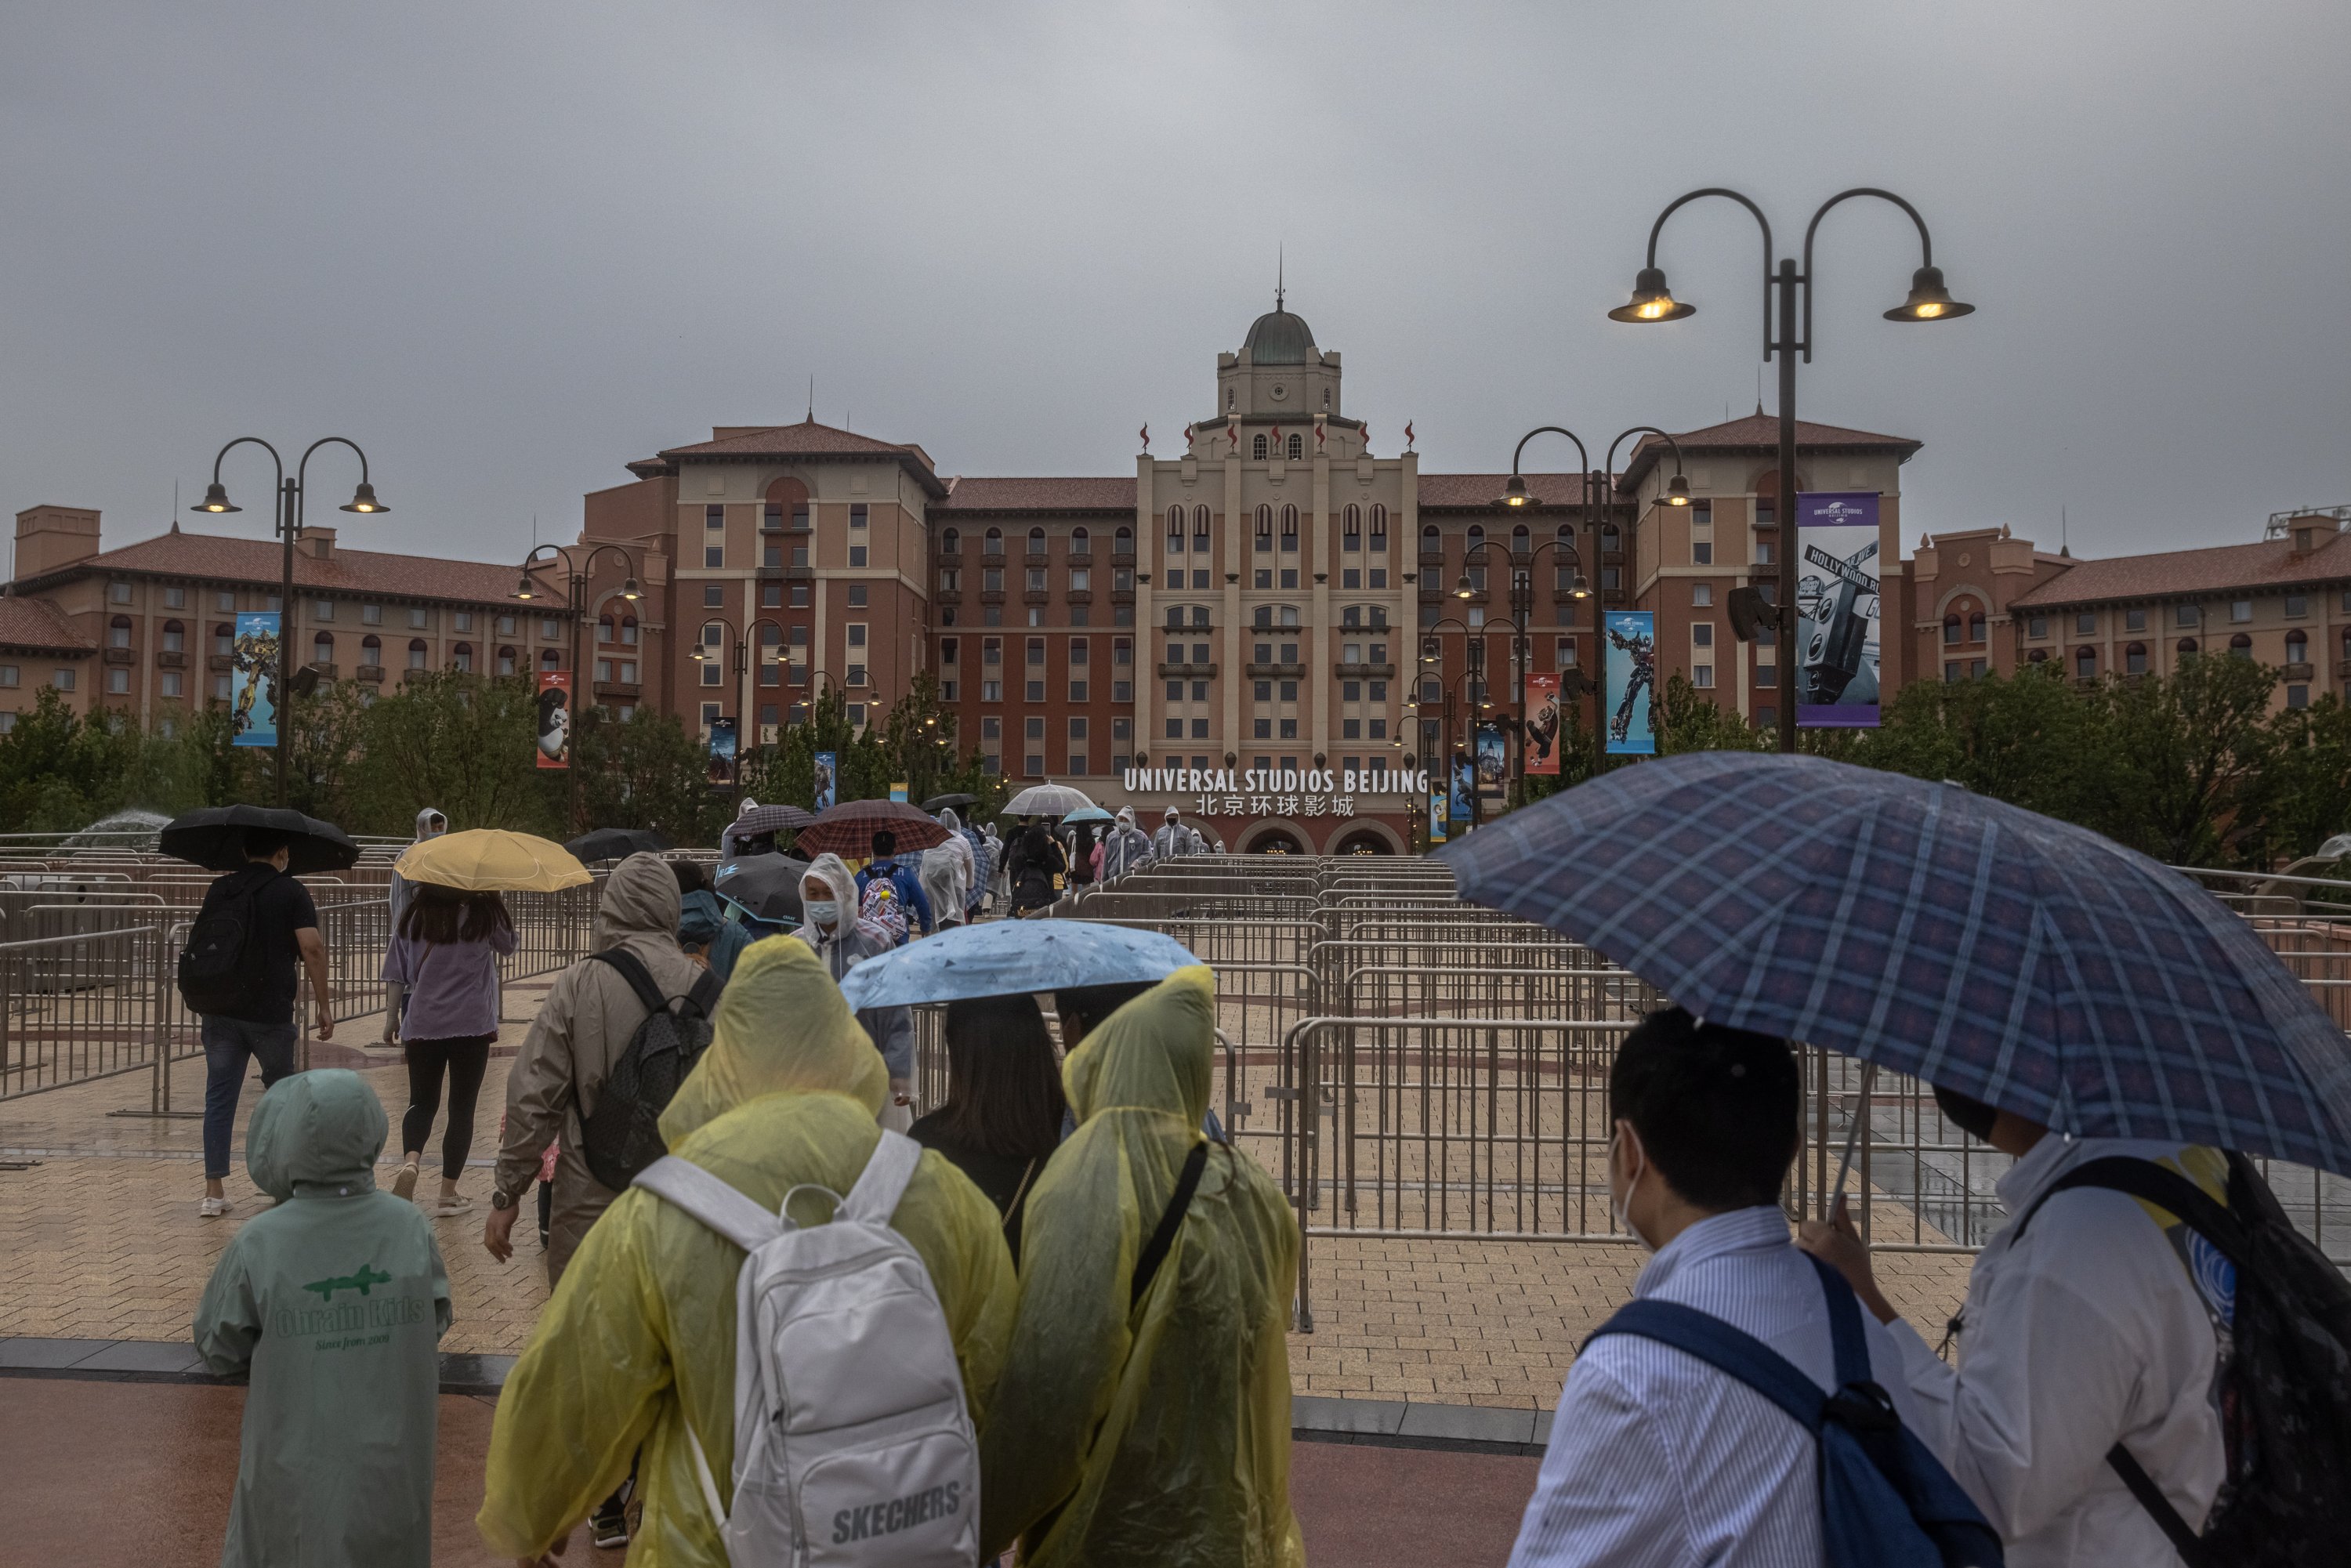 Visitors walk under the rain to enter Universal Studios Beijing on the official opening day, in Beijing, China, Sept. 20, 2021. (EPA Photo)